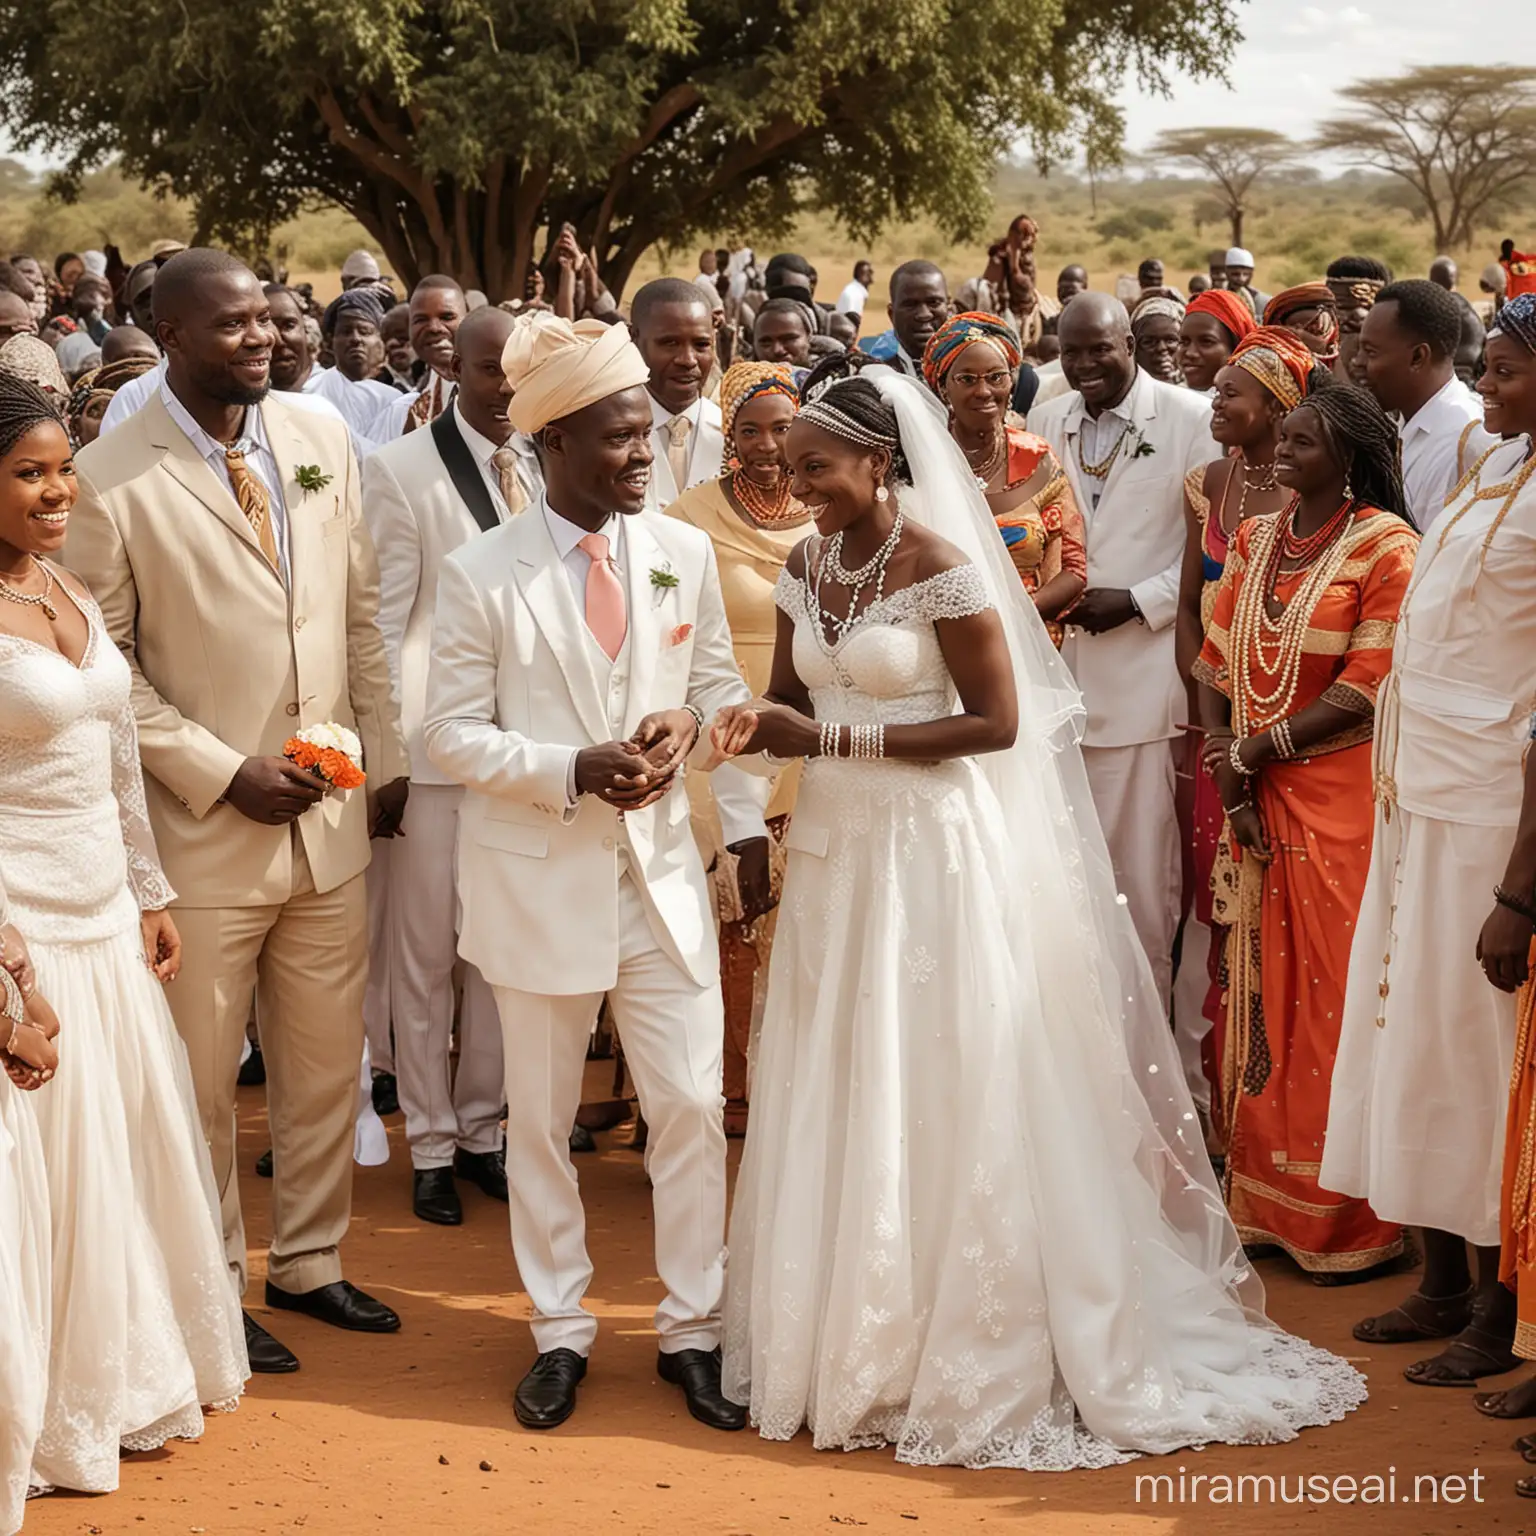 Traditional African Wedding Ceremony with Colorful Attire and Dancing Celebrations